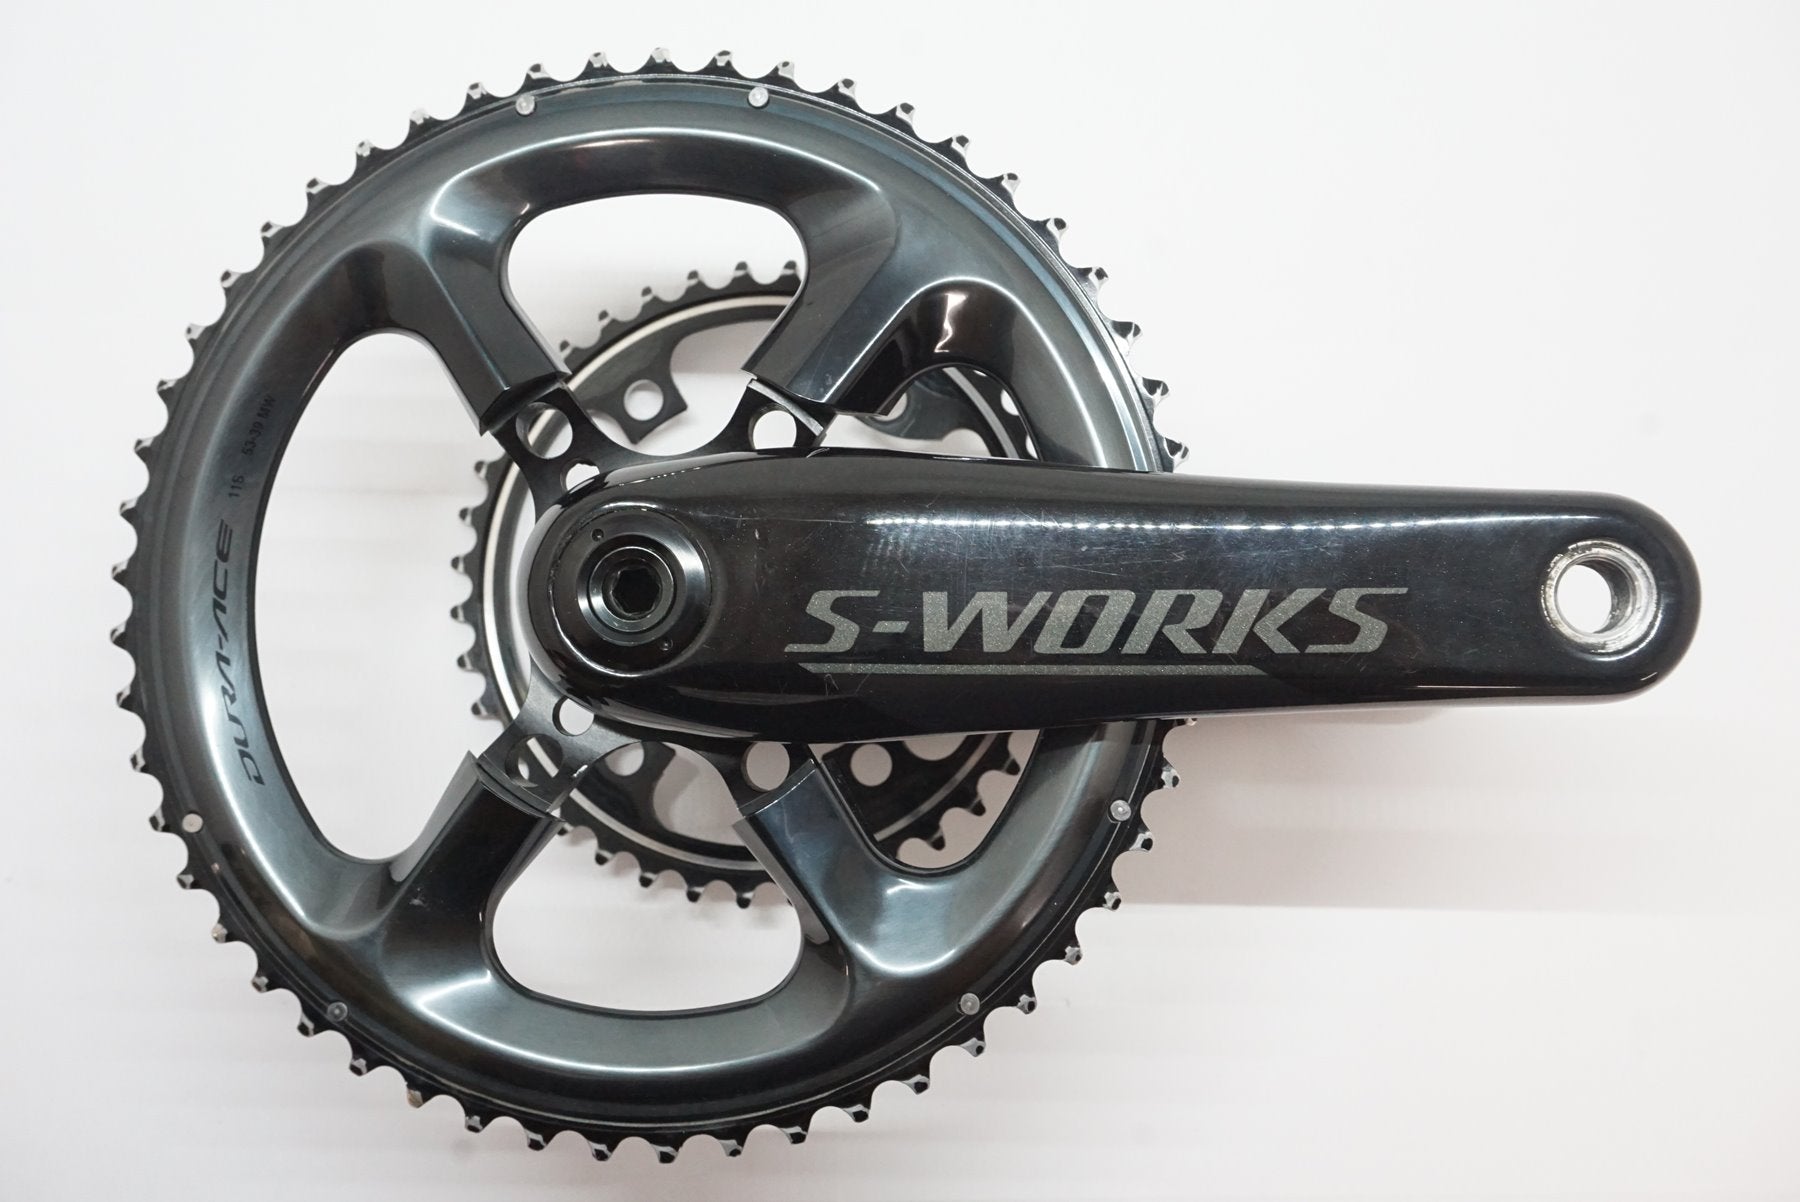 SPECIALIZED 「スペシャライズド」 S-WORKS POWER CRANK DUAL 53-39T 172.5mm クランク / 宇都宮店